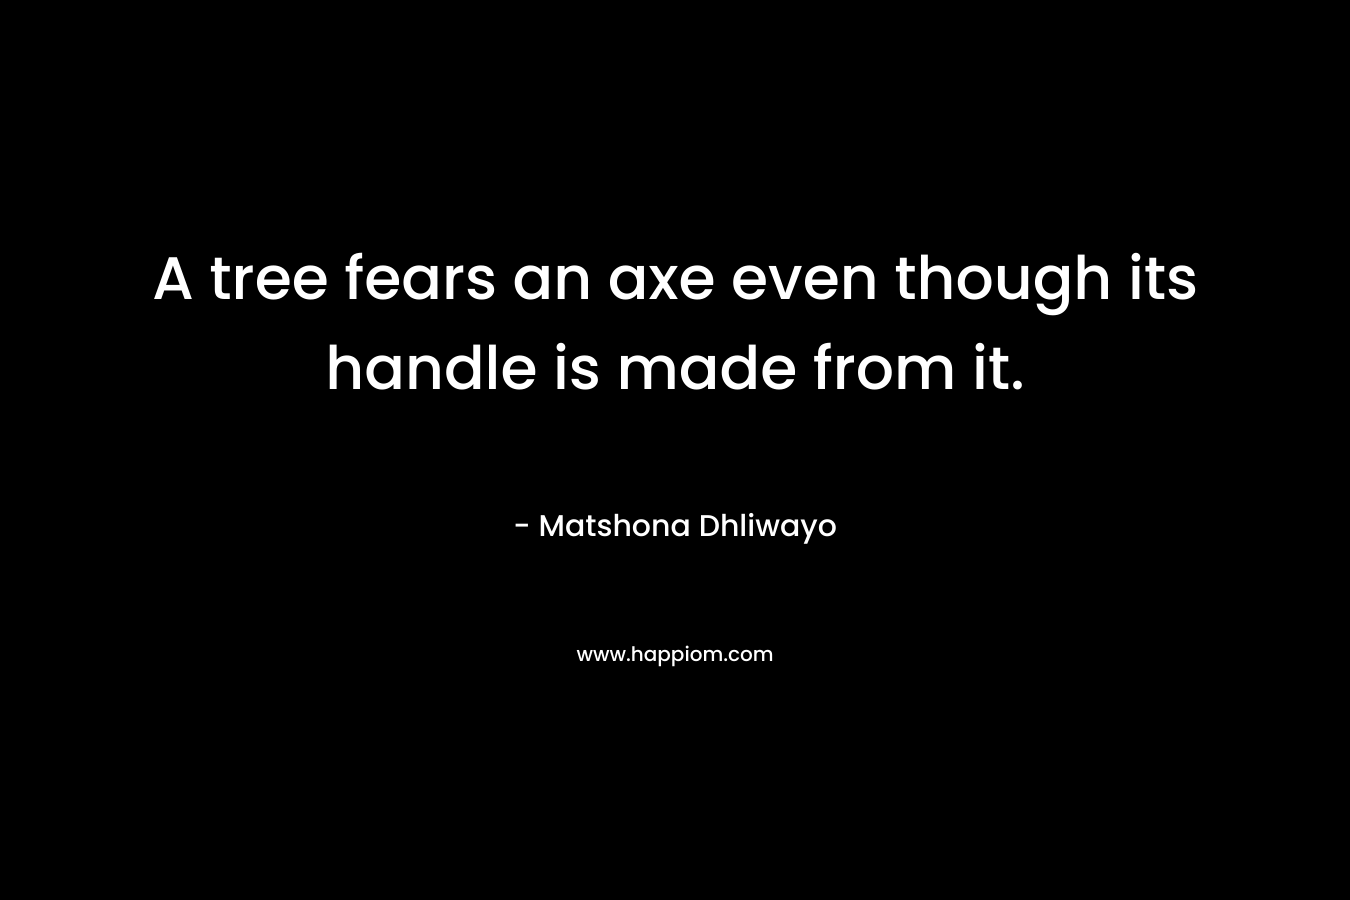 A tree fears an axe even though its handle is made from it. – Matshona Dhliwayo